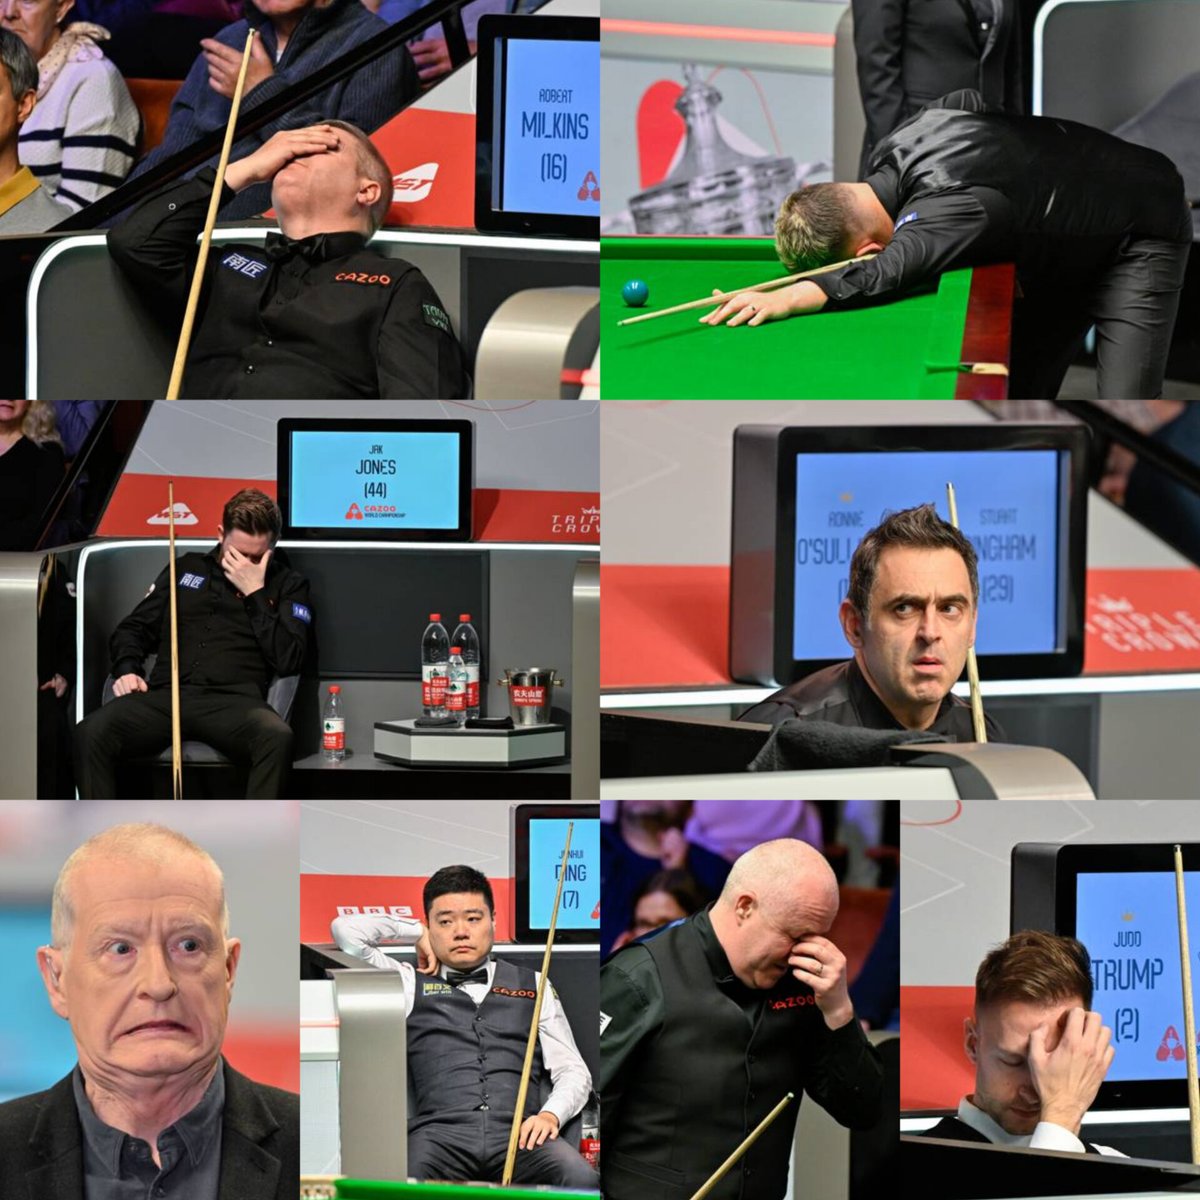 No snooker today 😫😭
#snooker #WorldChampionship
📸 Imago-images